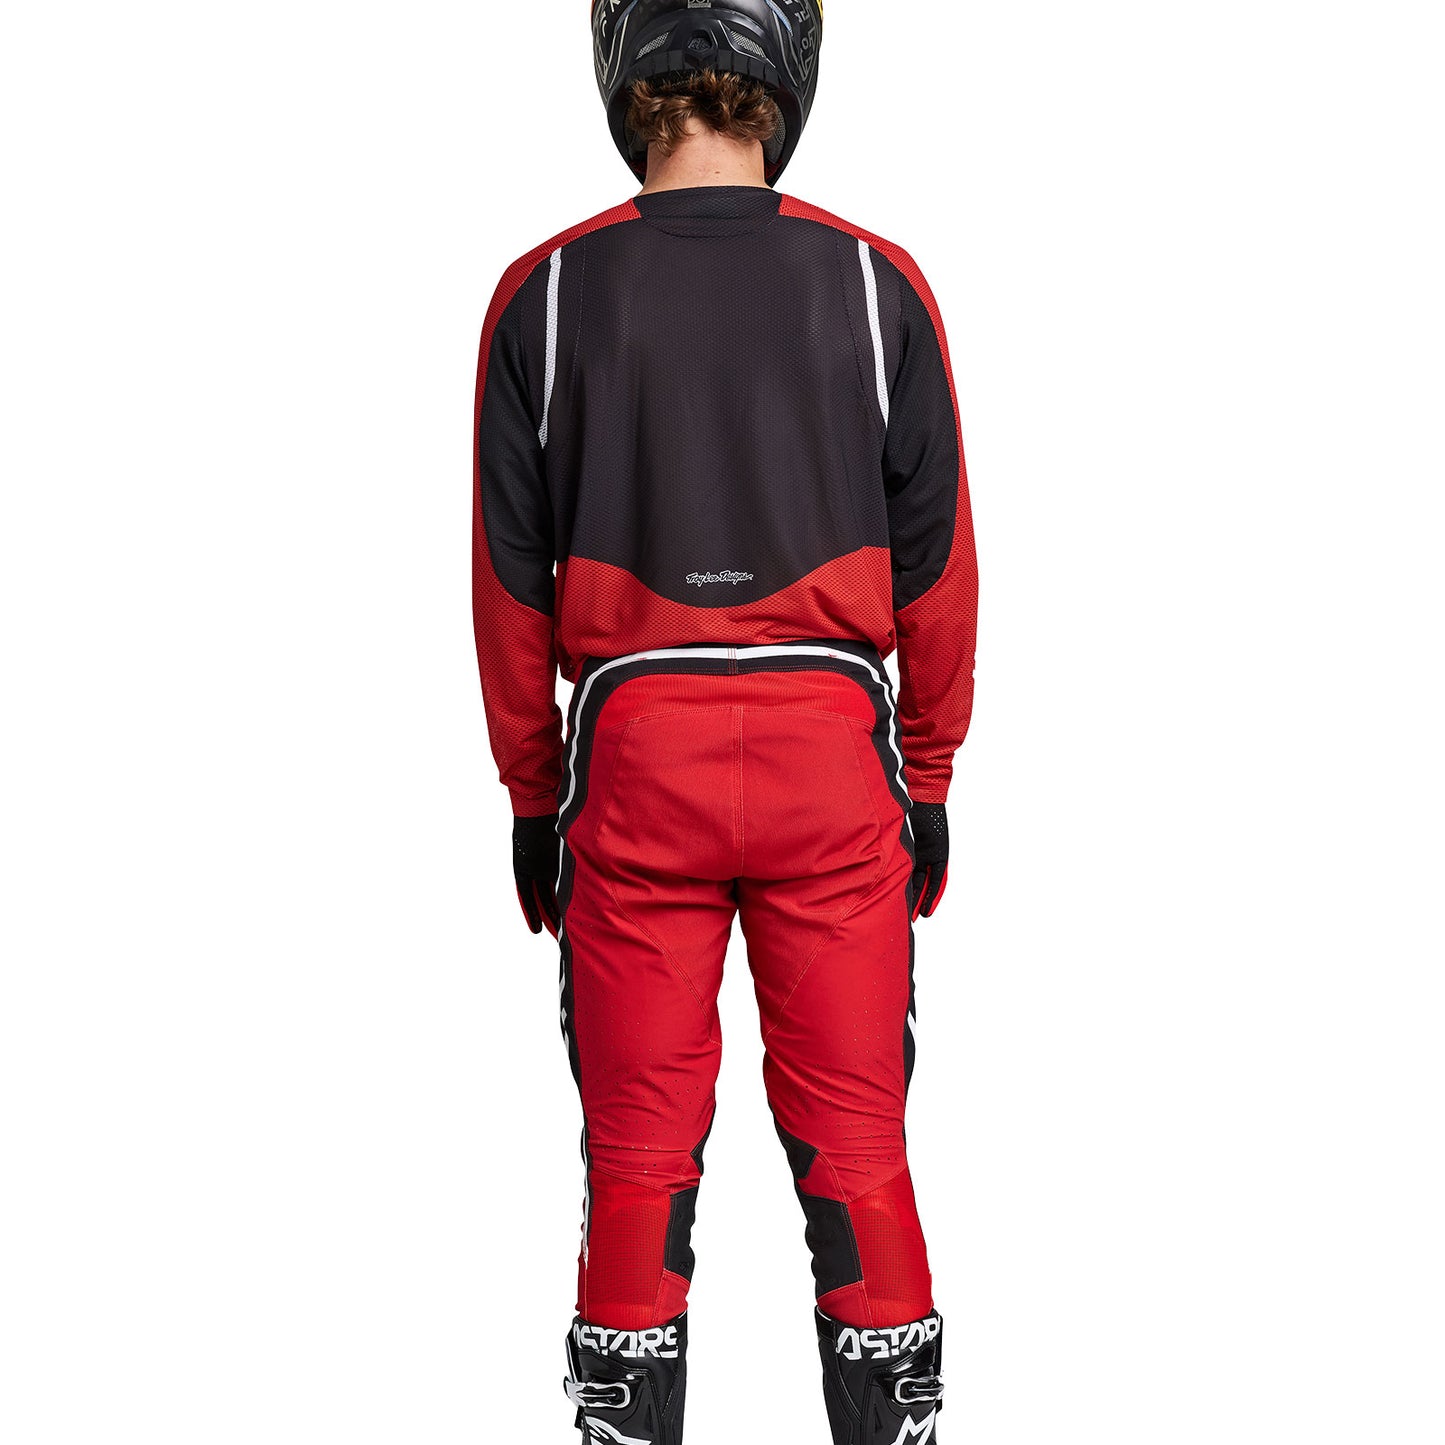 SE Pro Air Jersey Pinned Red